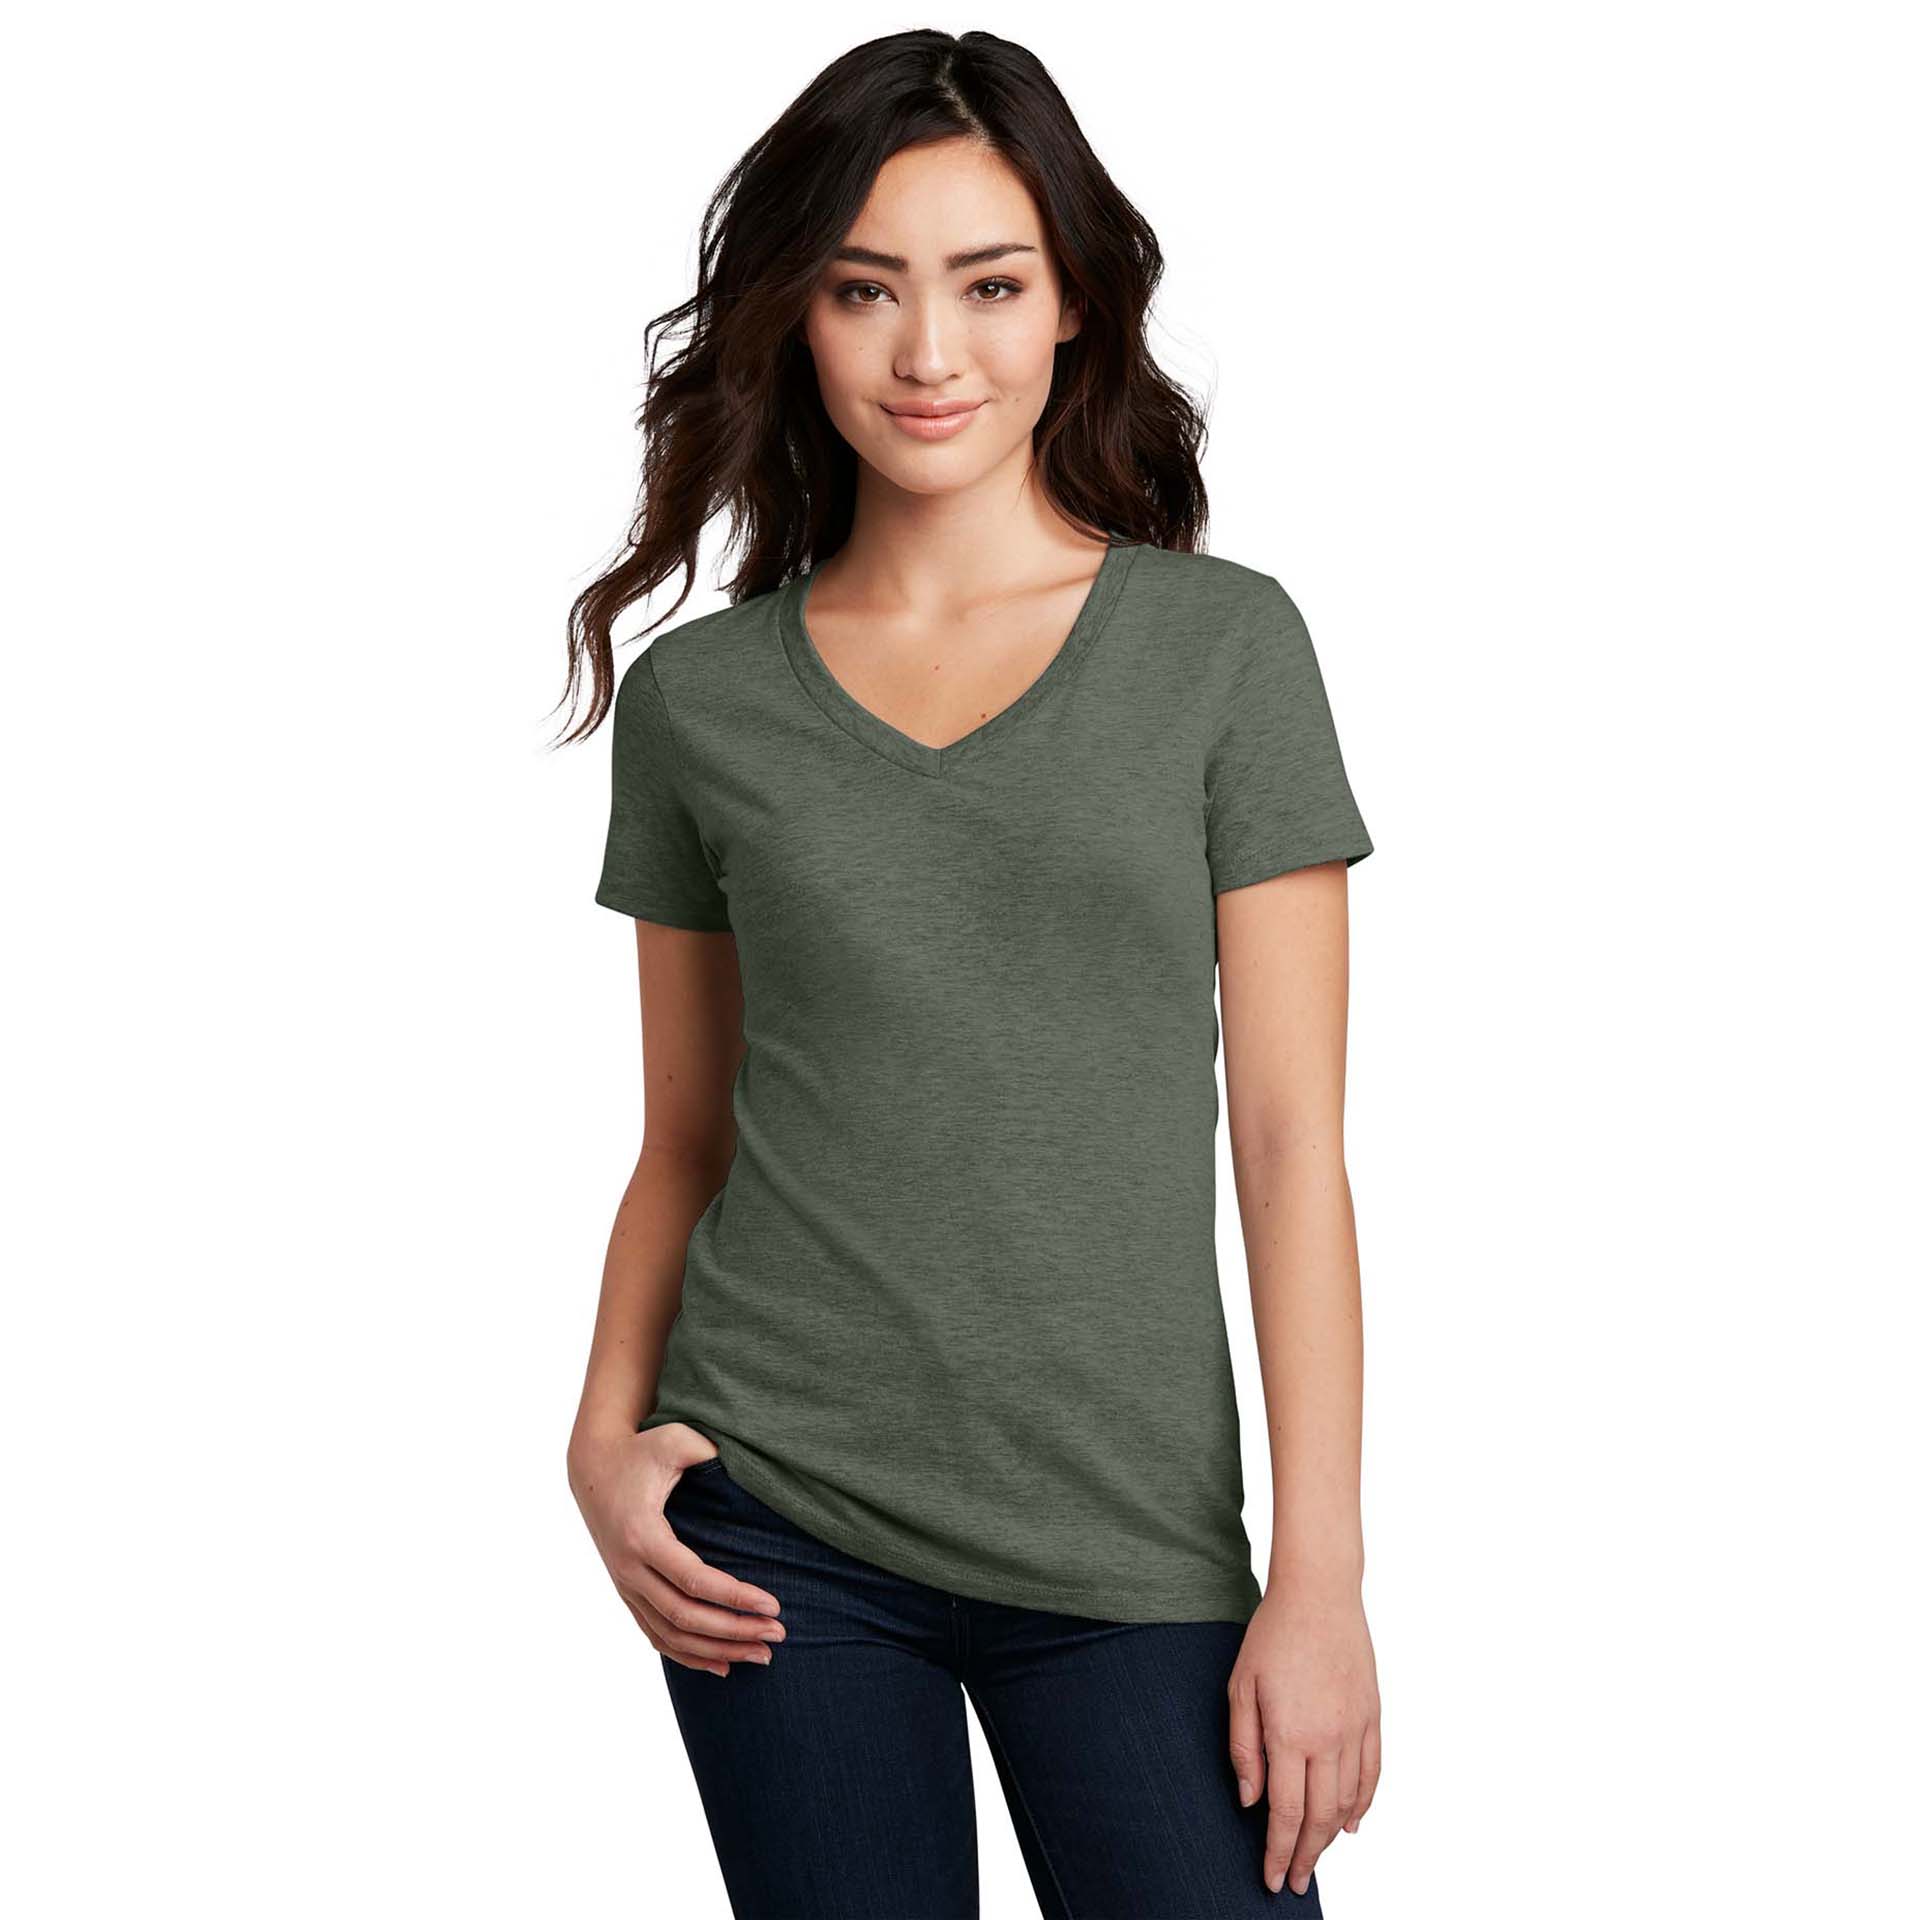 District DM1190L Women's Perfect Blend V-Neck Tee - Heathered Olive ...